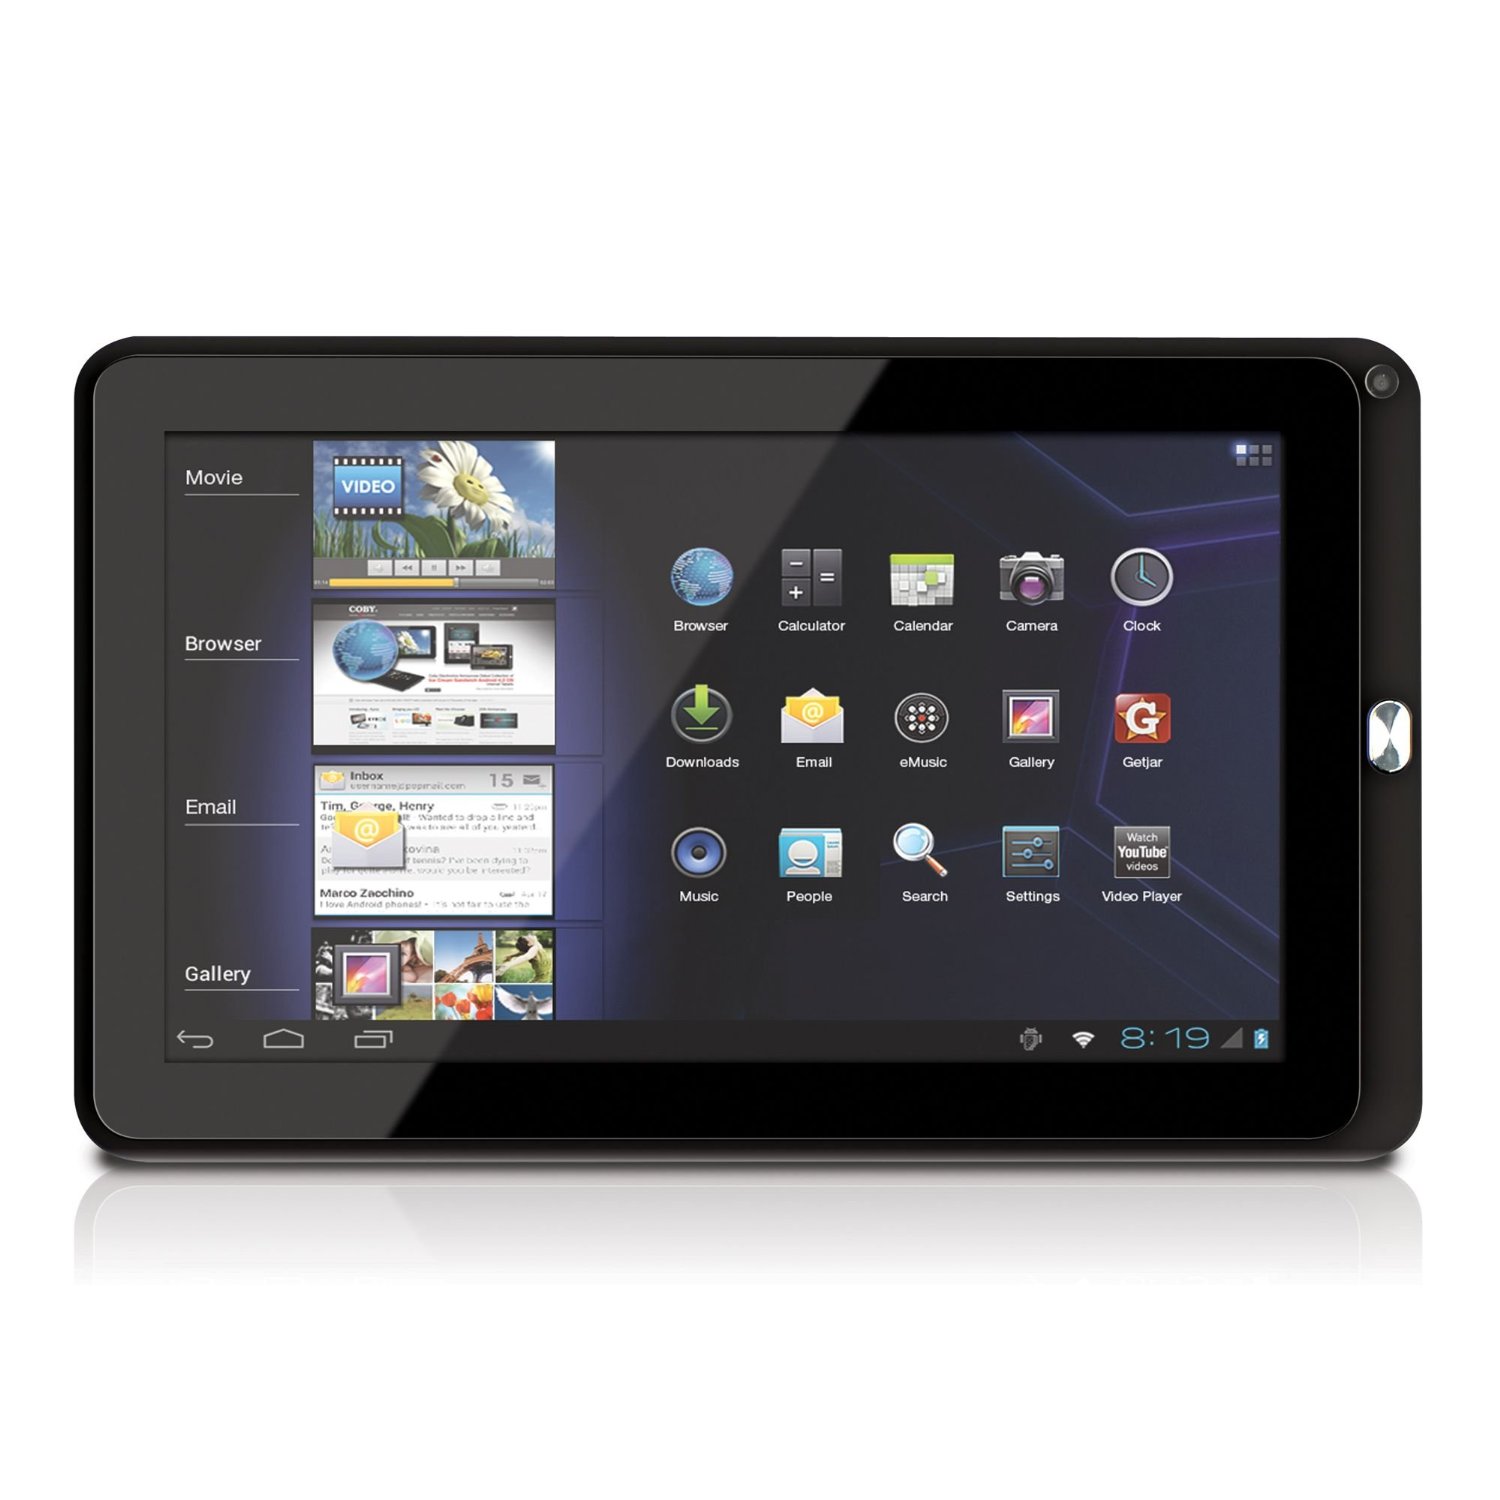 http://thetechjournal.com/wp-content/uploads/images/1206/1339867848-coby-kyros-101inch-android-powered-internet-tablet-1.jpg